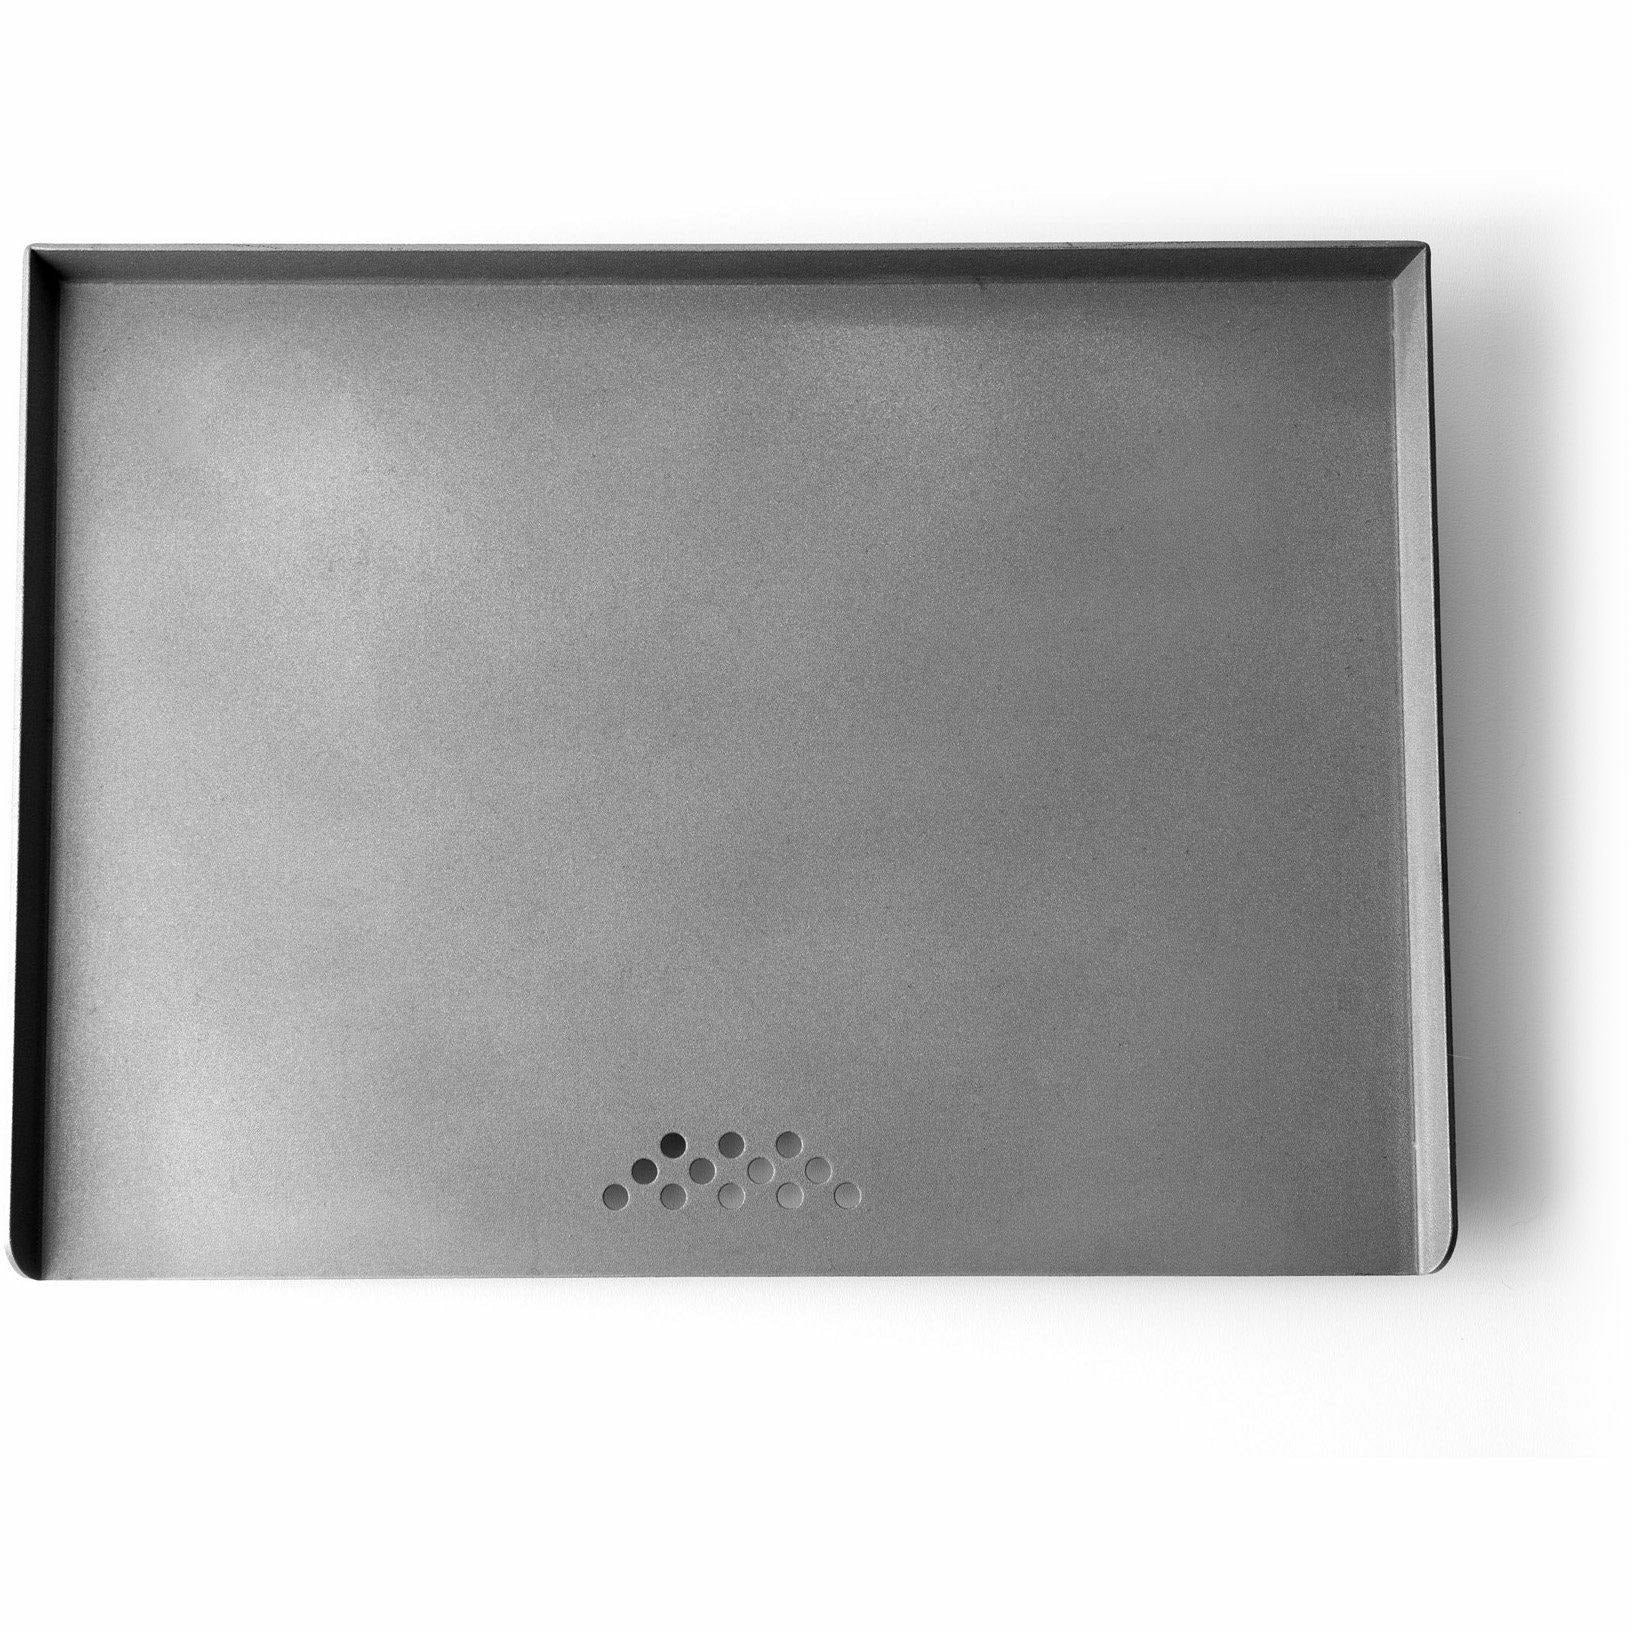 The Middle Man 16x20, 1/4 Thick Baking Pizza Steel Oven Steel Steel Plate 